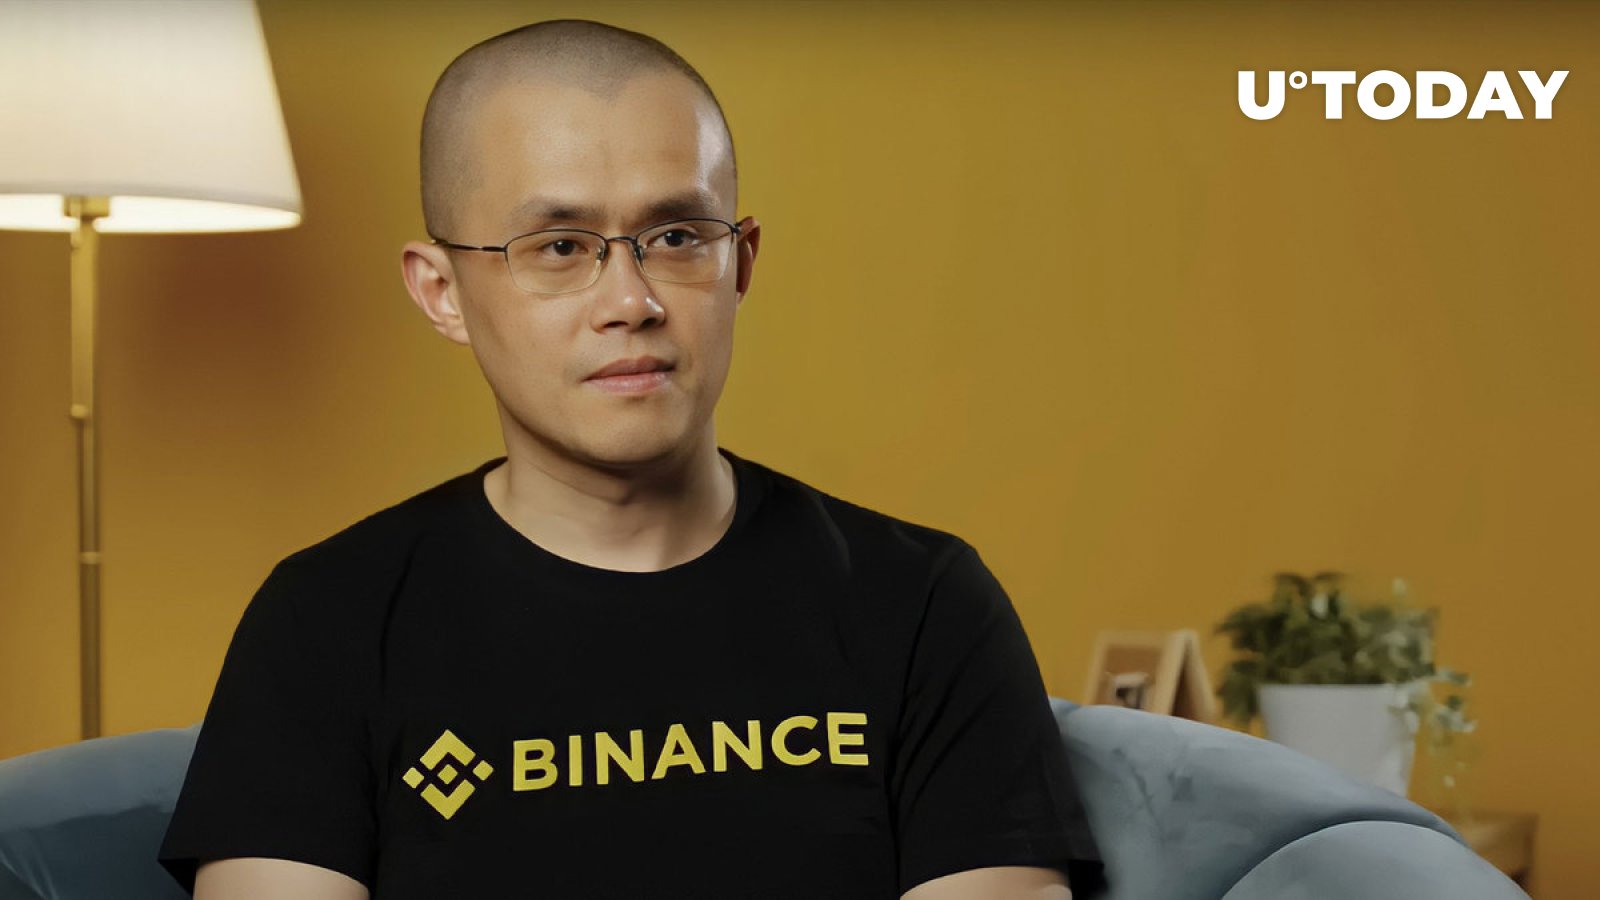 Binance CEO Causes Massive Pump on This Token But Then Crashes It